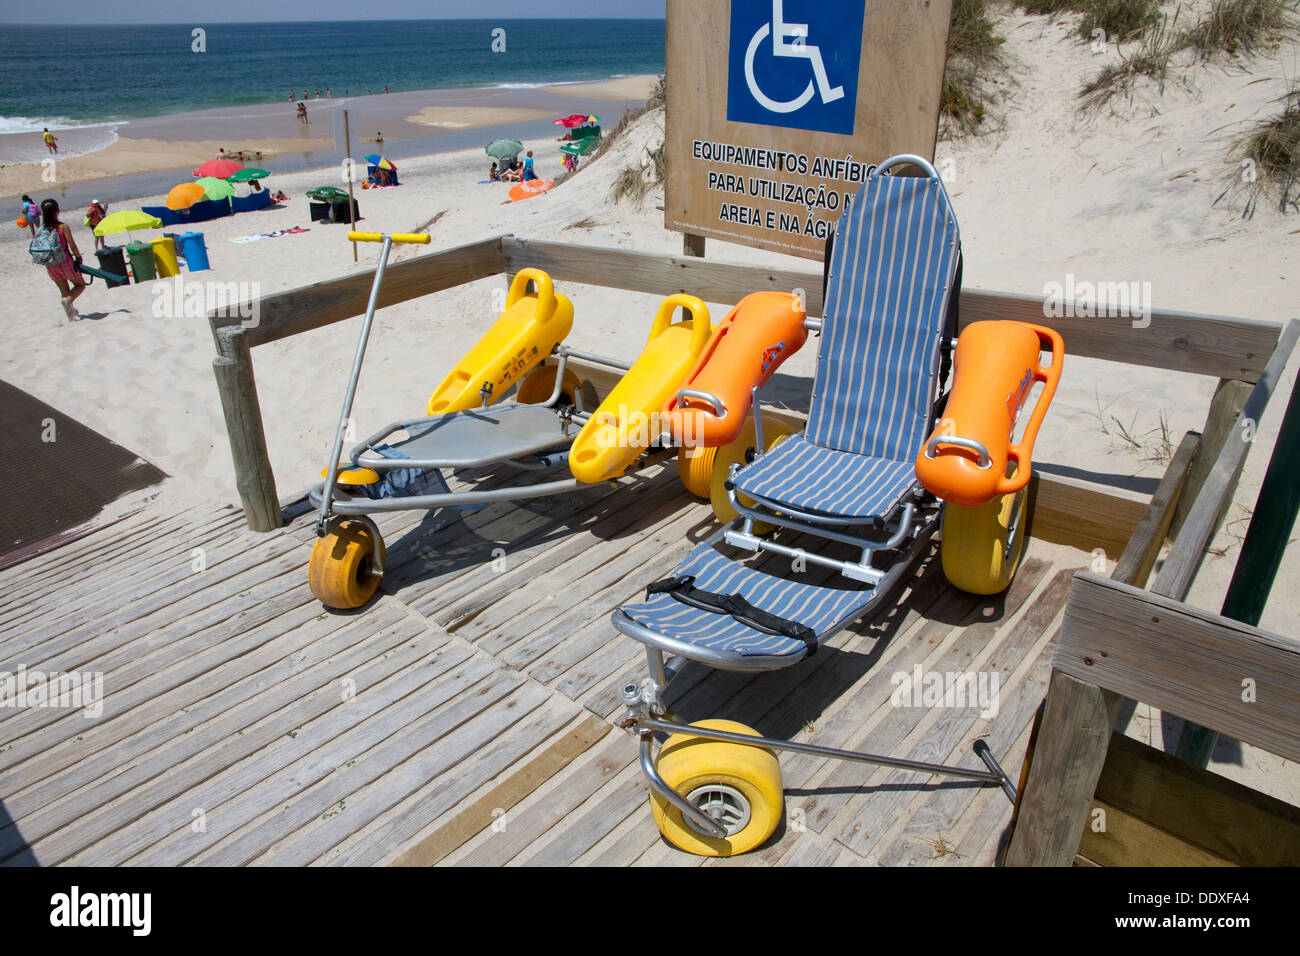 Wheelchairs and mobility equipment for use on beach and in water, Osso da Baleia Beach, Mata Nacional do Urso, Pombal, Portugal Stock Photo